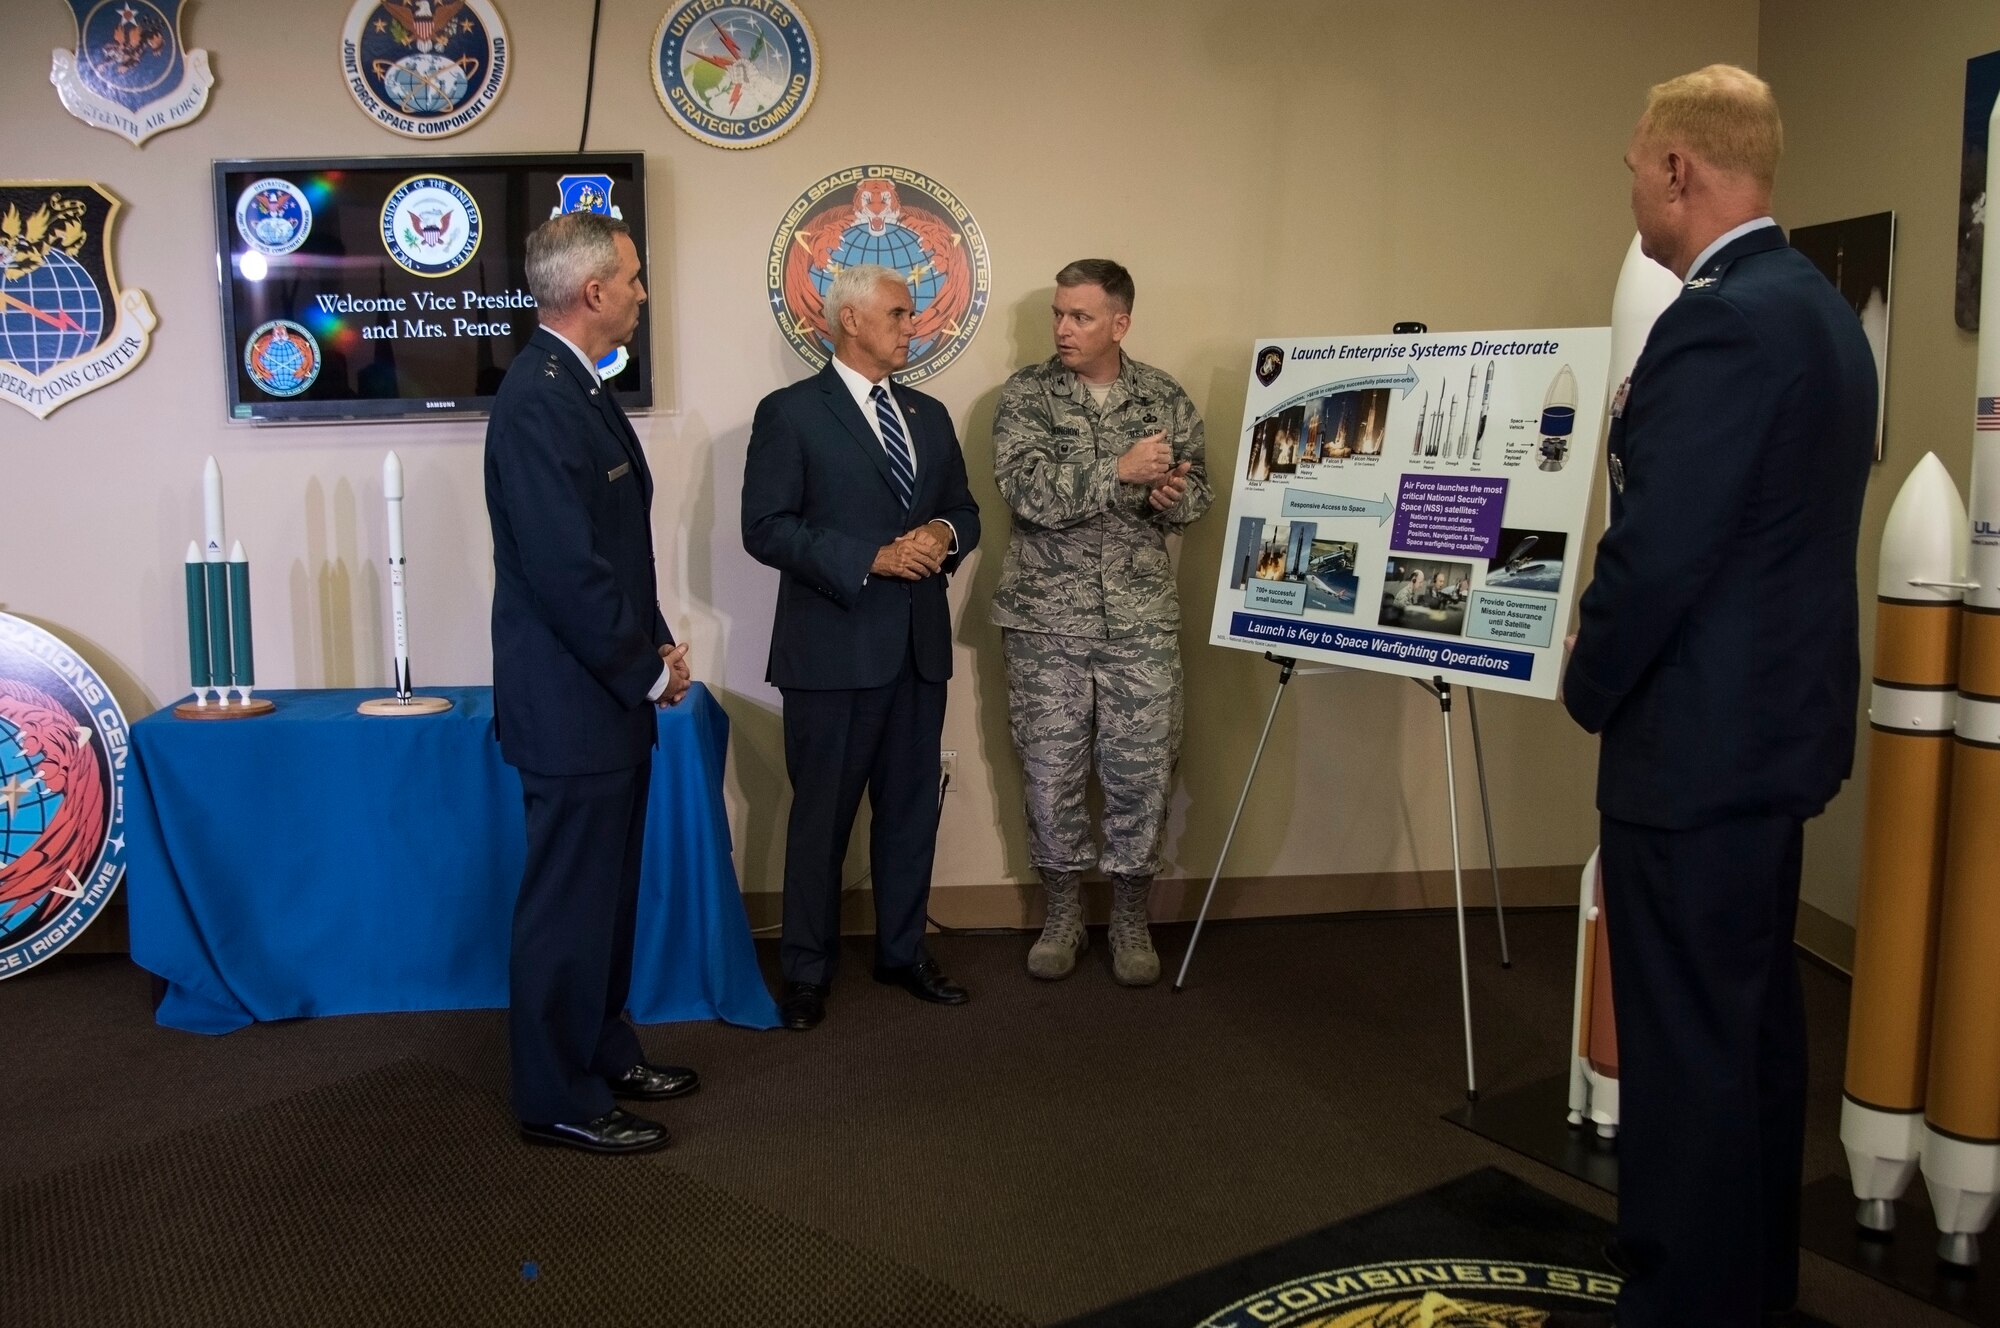 Vice President Mike Pence tours the Combined Space Operations Center July 10, 2019, at Vandenberg Air Force Base, Calif. While at the CSpOC, Pence met with base leadership and received briefings on the evolution of launch operations at the Western Range and CSpOC operations, which concluded with an all-call to the service men and women of Vandenberg AFB. (U.S. Air Force photo by Airman 1st Class Hanah Abercrombie)